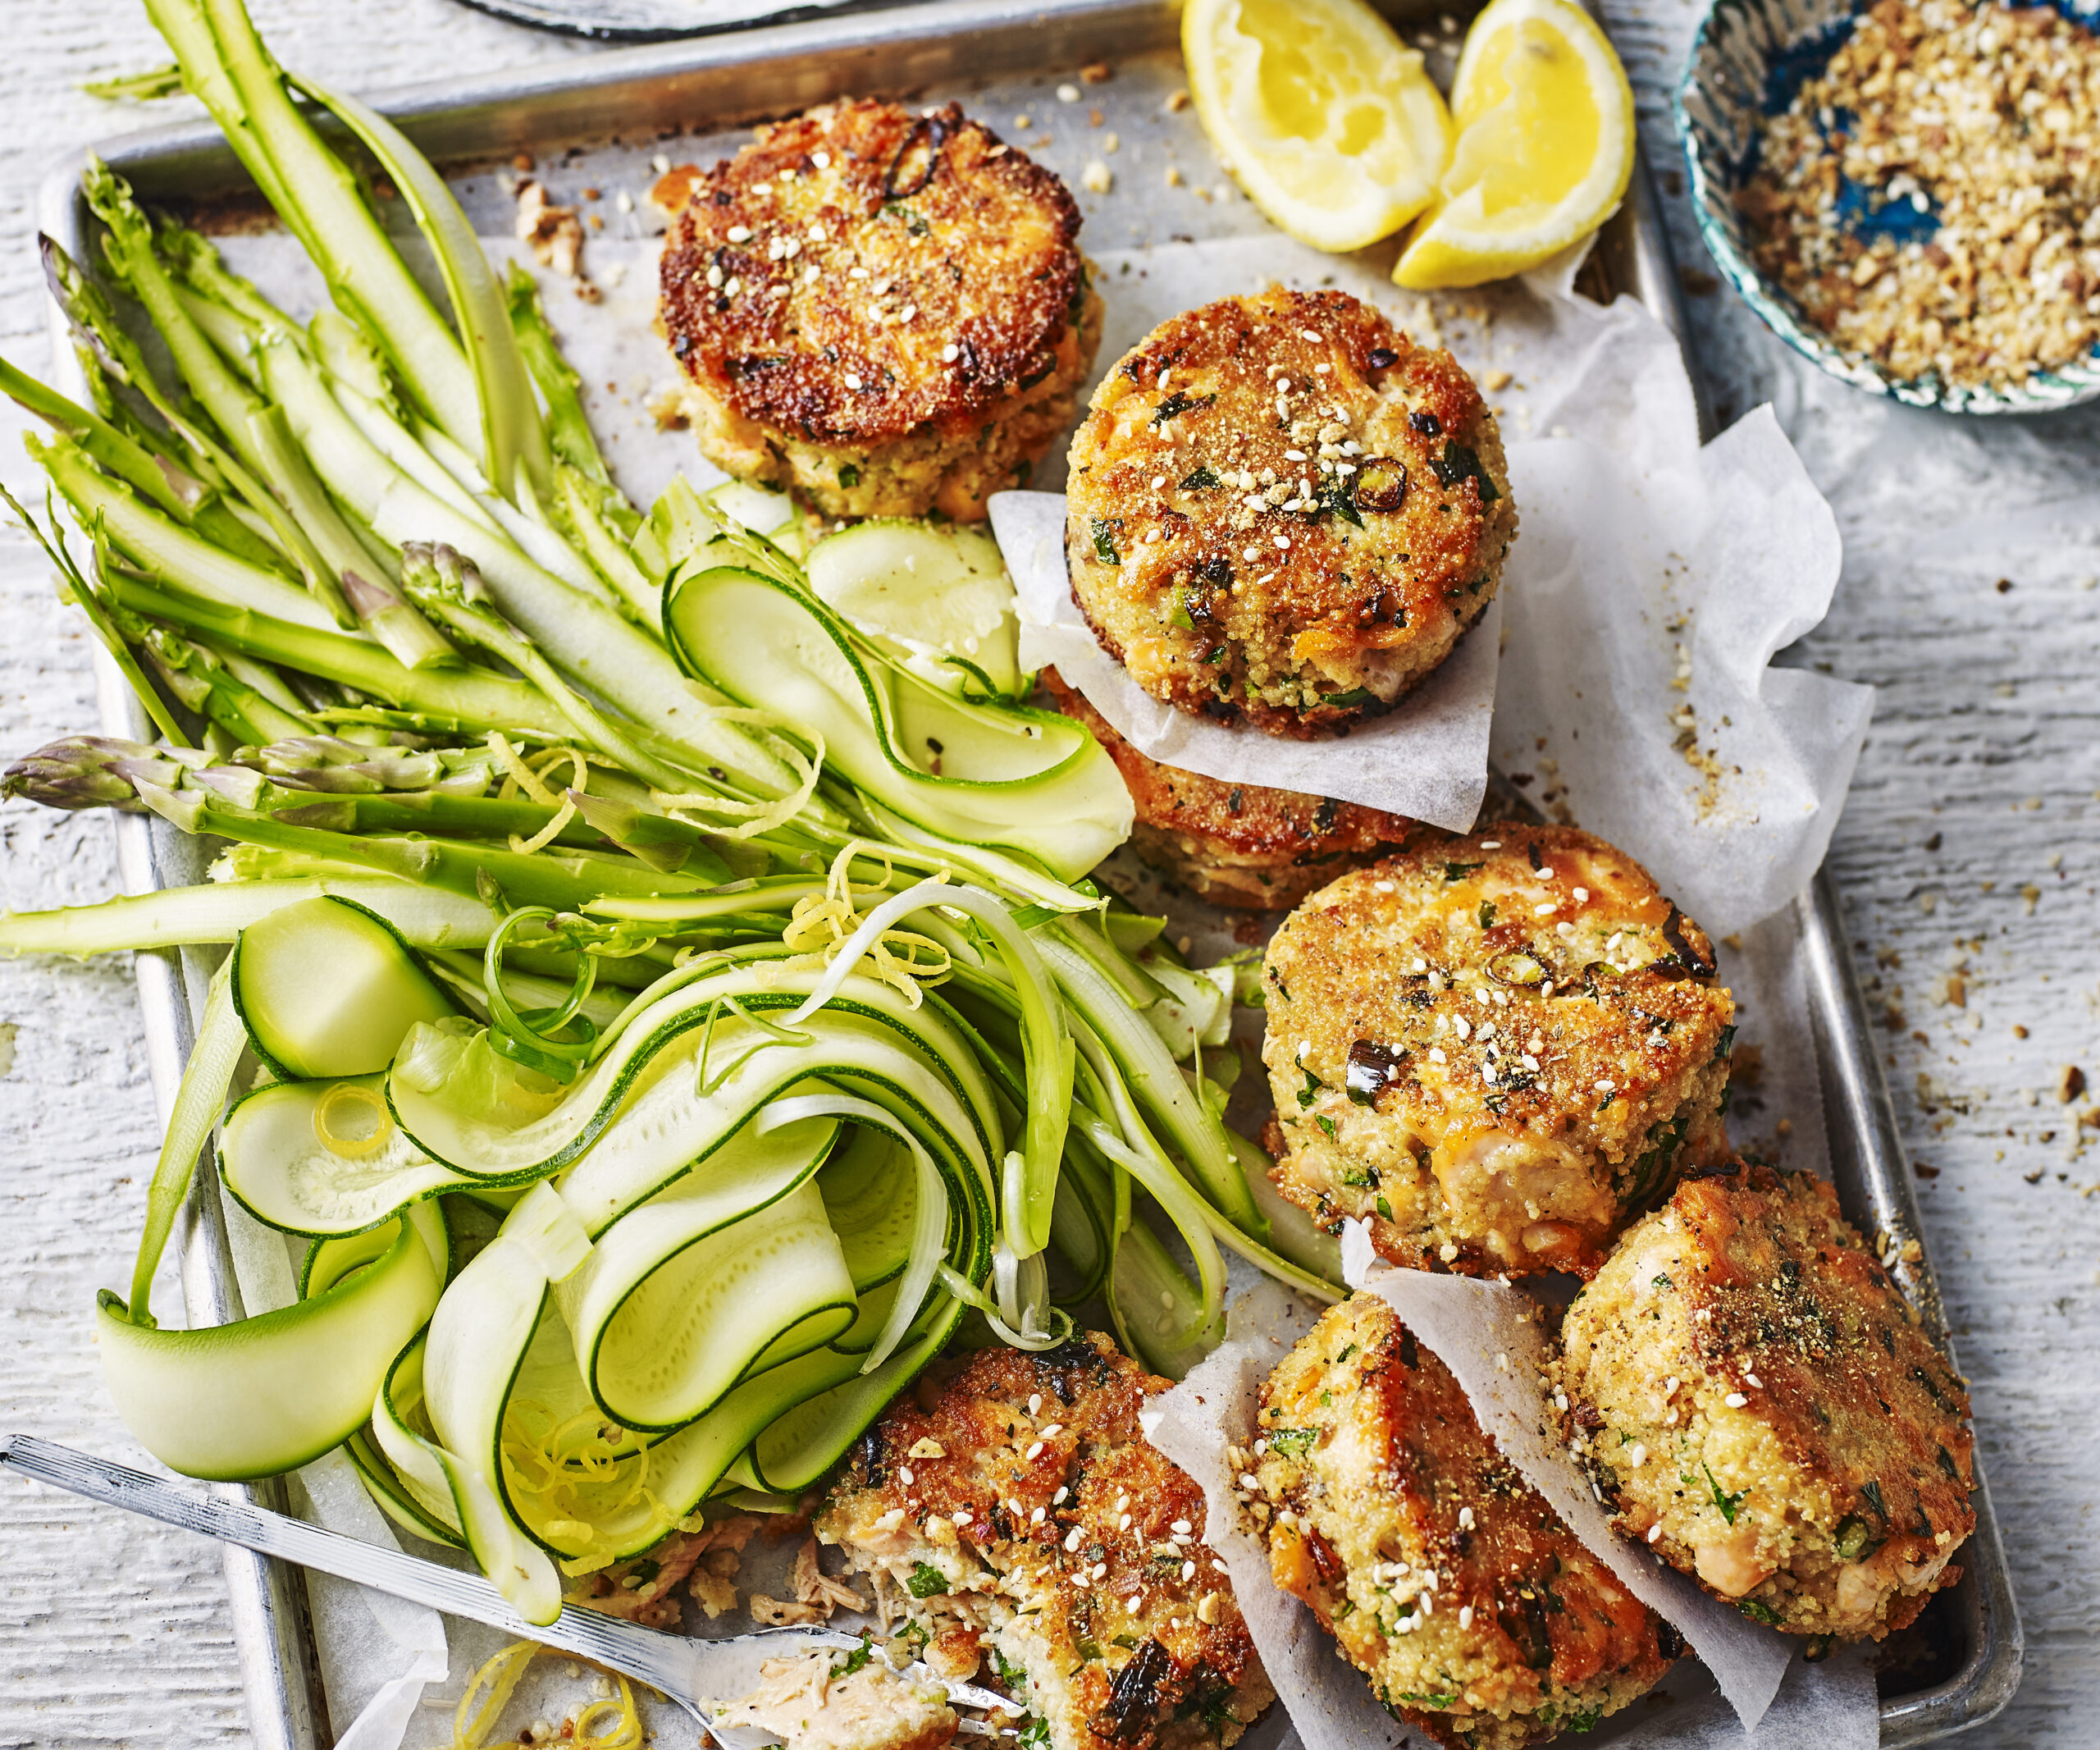 Dukkah salmon patties with zucchini and asparagus salad